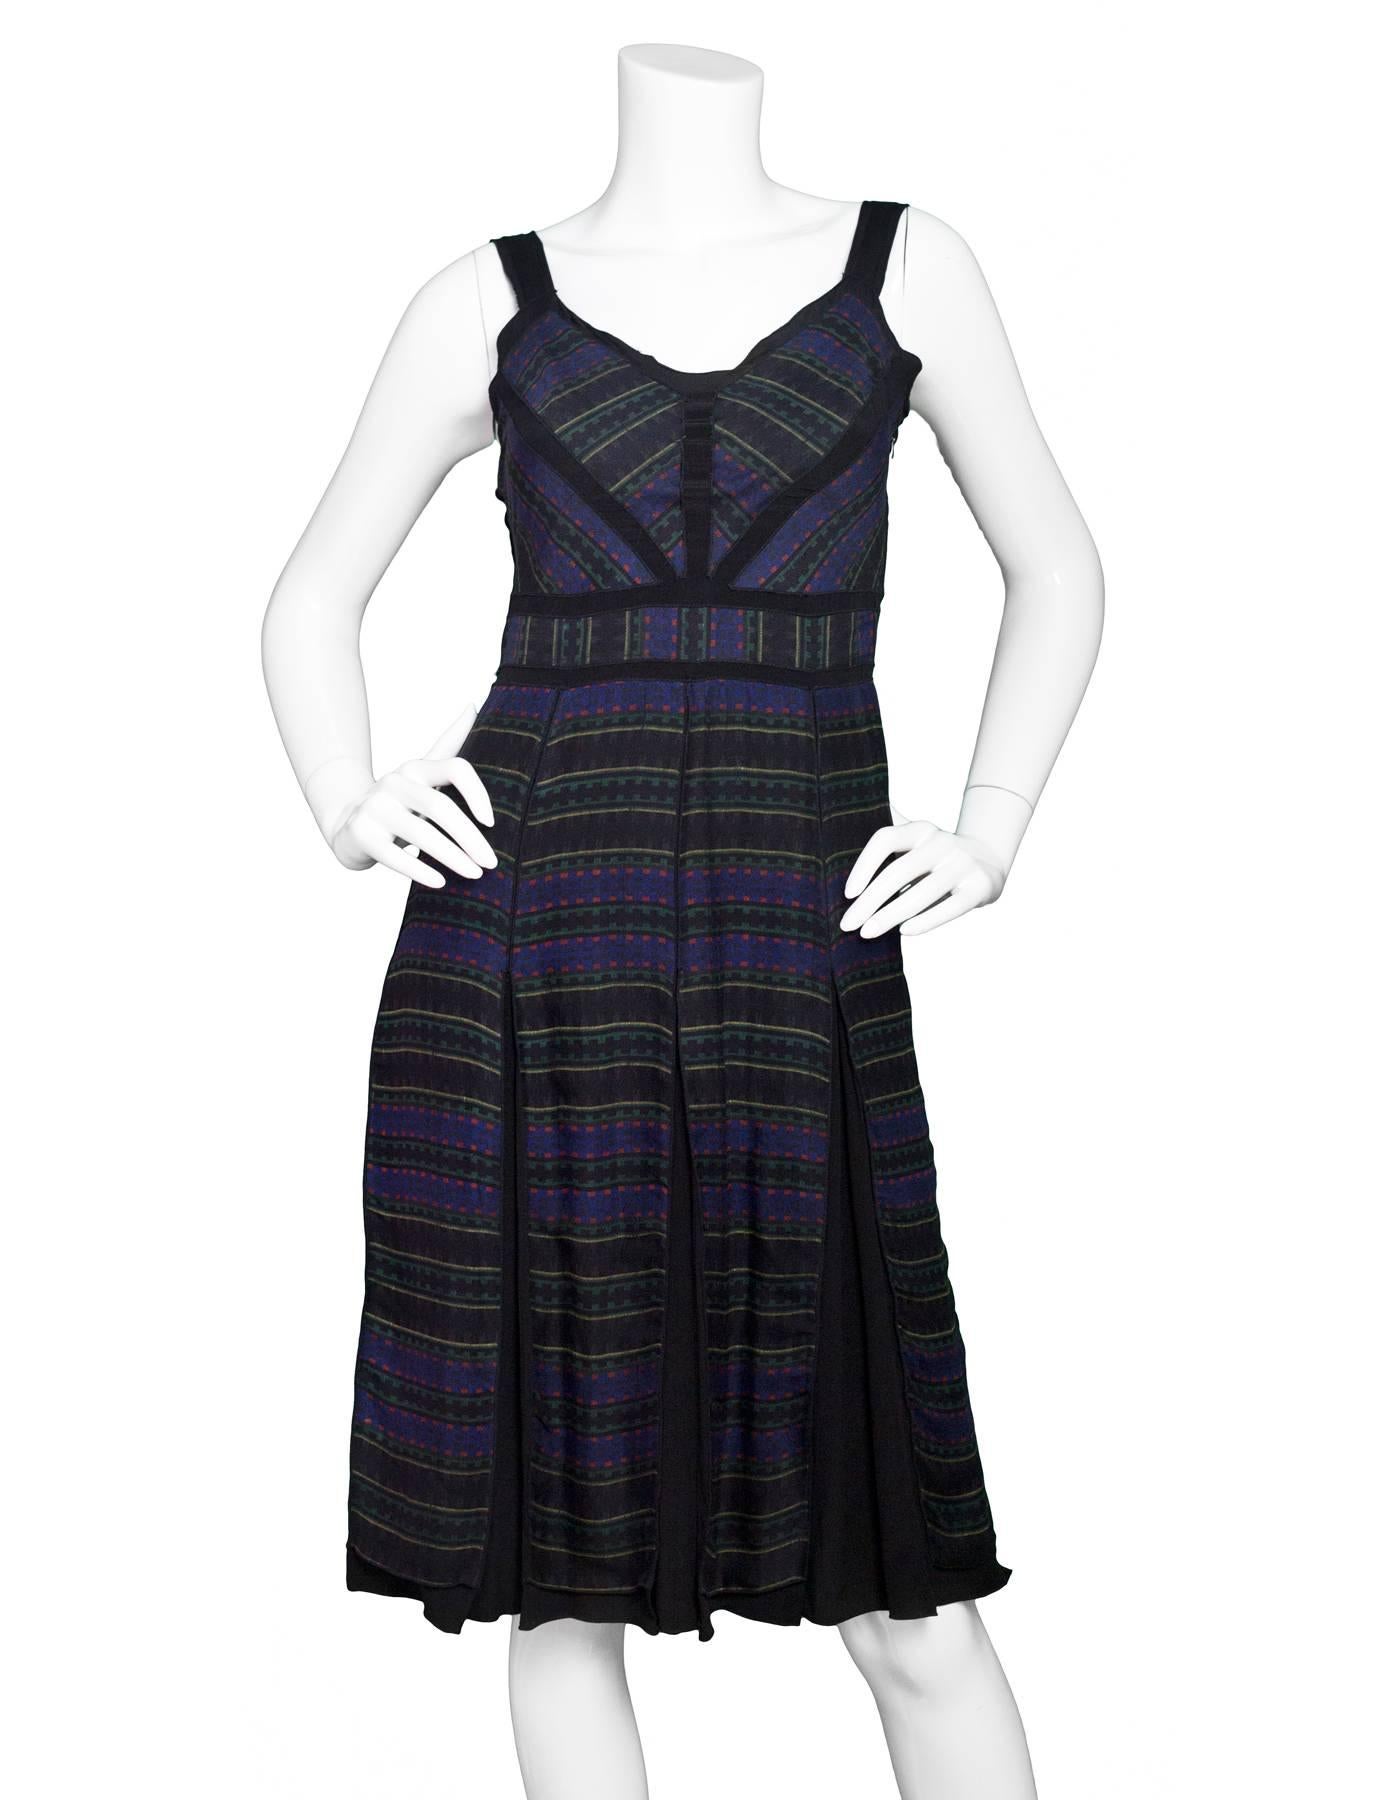 Proenza Schouler Tribal Print Silk Pleated Dress

Color: Black, blue, red, green and yellow
Composition: Not given- believed to be 100% silk
Lining: Black, Silk
Closure/Opening: Side zip up
Exterior Pockets: None
Interior Pockets: None
Overall